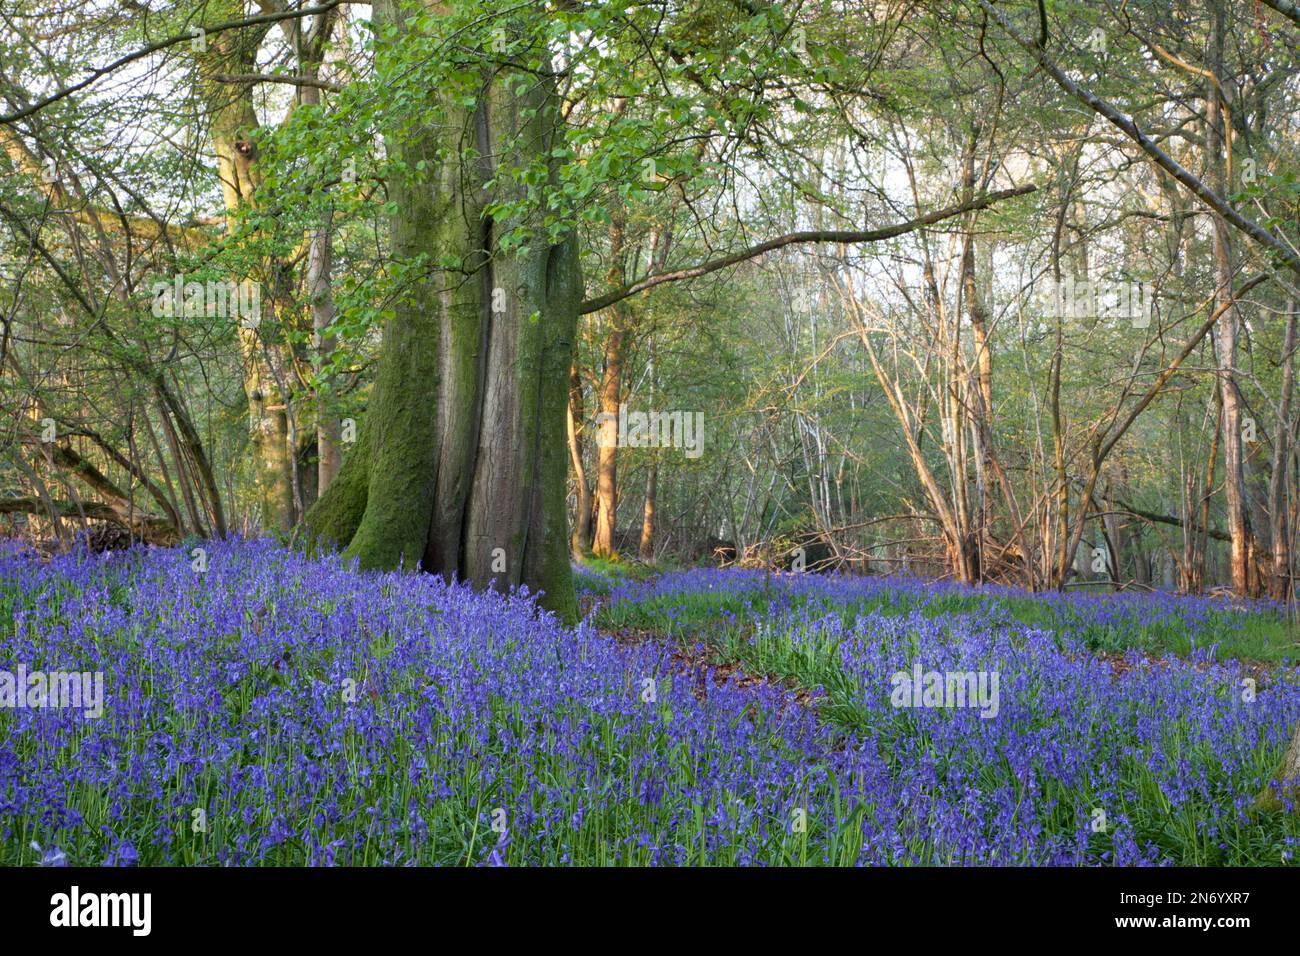 Bluebells a Grovely Wood, vicino a Wilton nel Wiltshire. Foto Stock